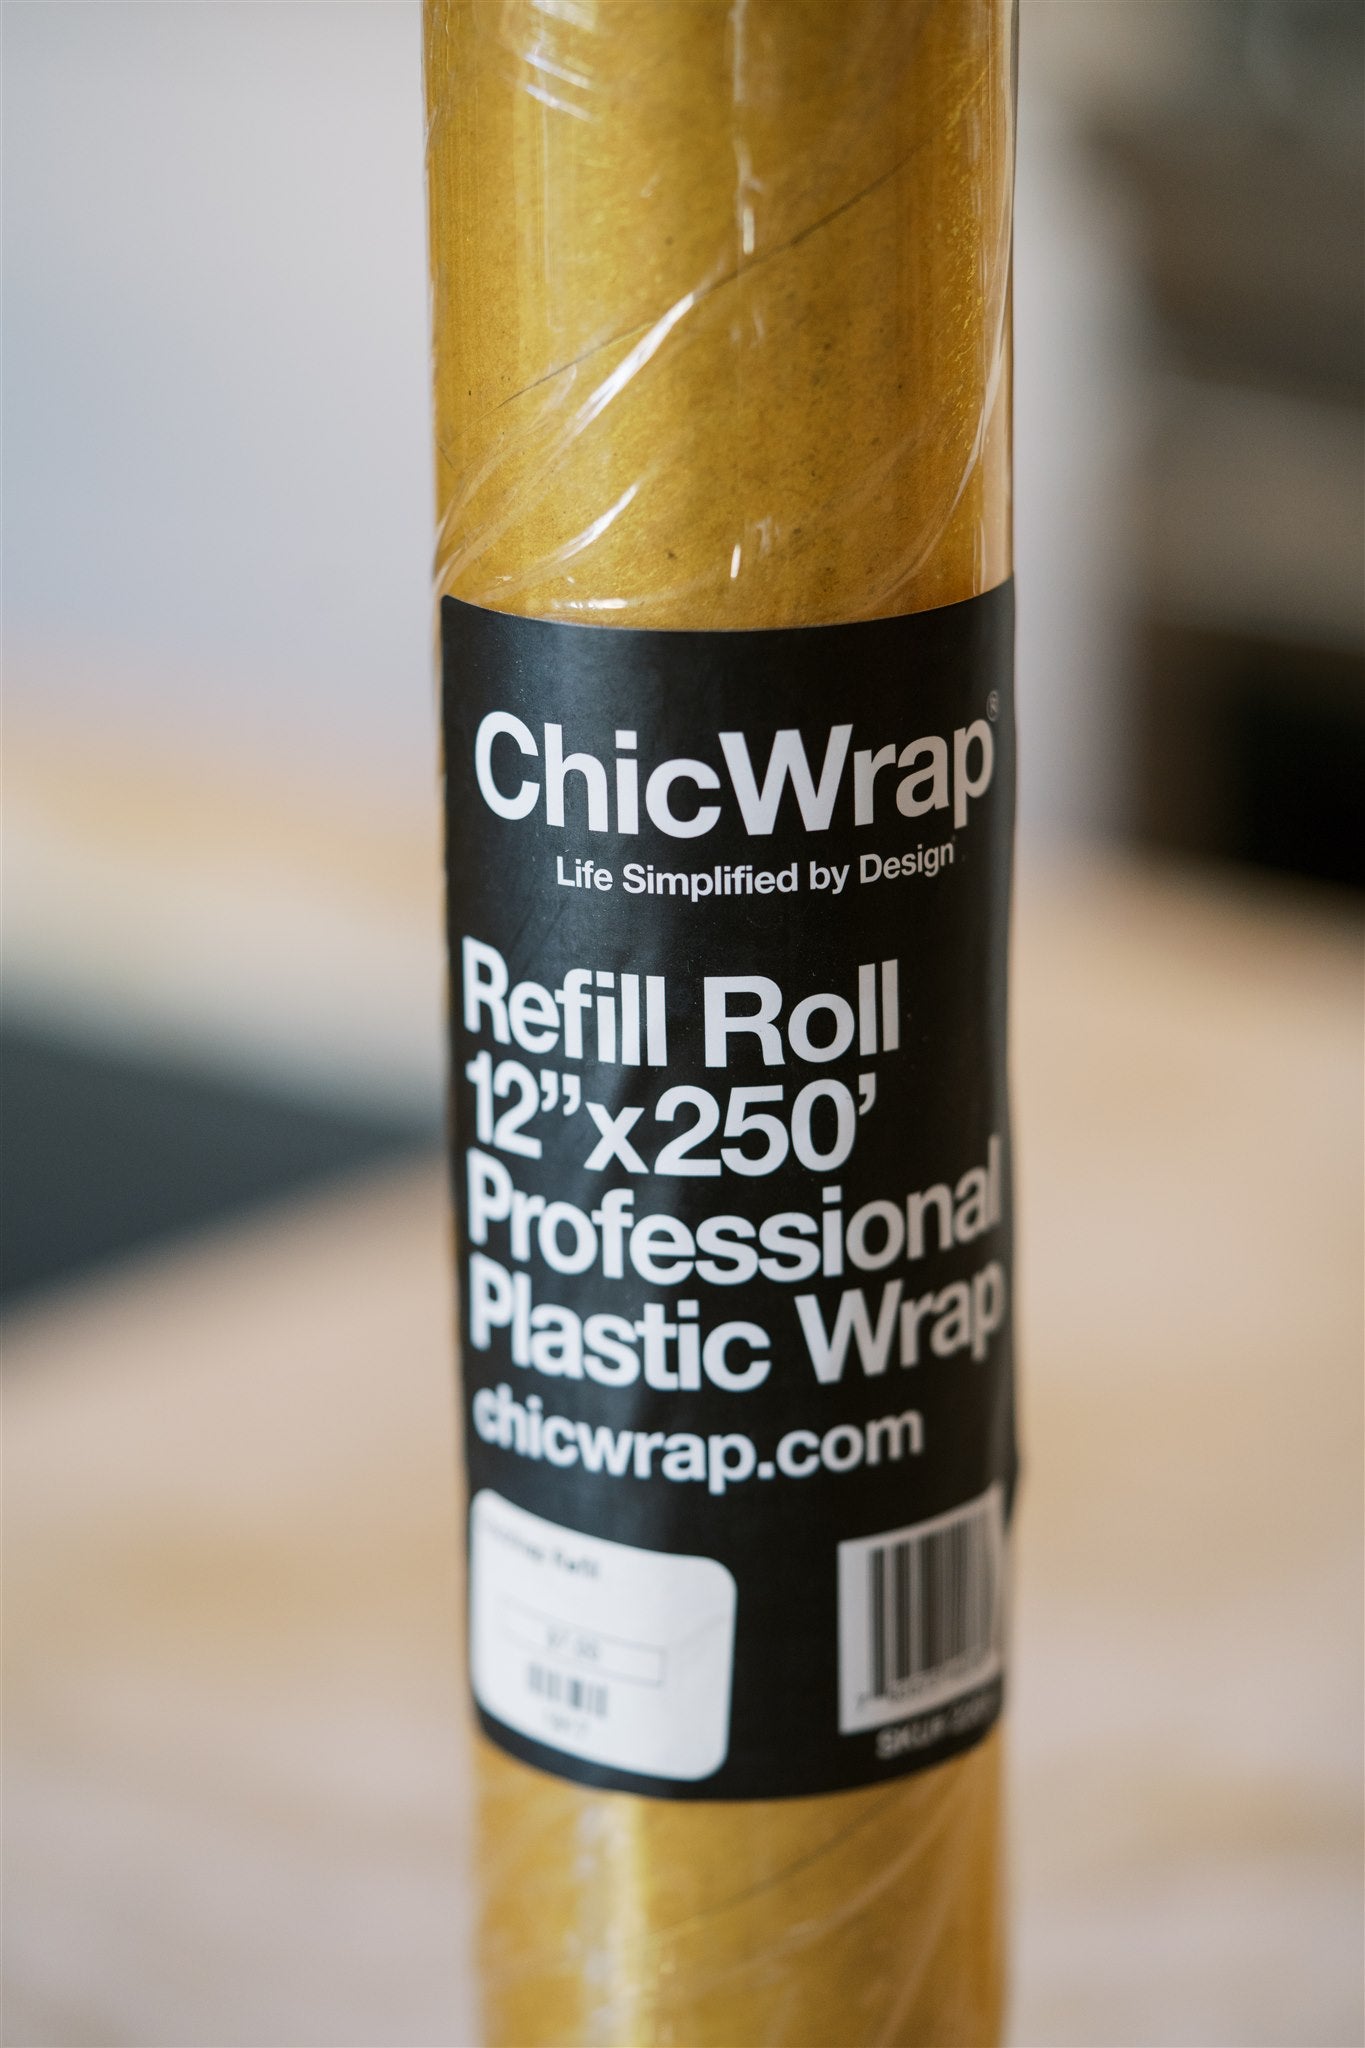 ChicWrap Professional Plastic Wrap 4 Pack Refill Rolls - 4 Count 12 x 250'  Plastic Wrap Refill Rolls - Creates Air-Tight Seal to Lock in Freshness